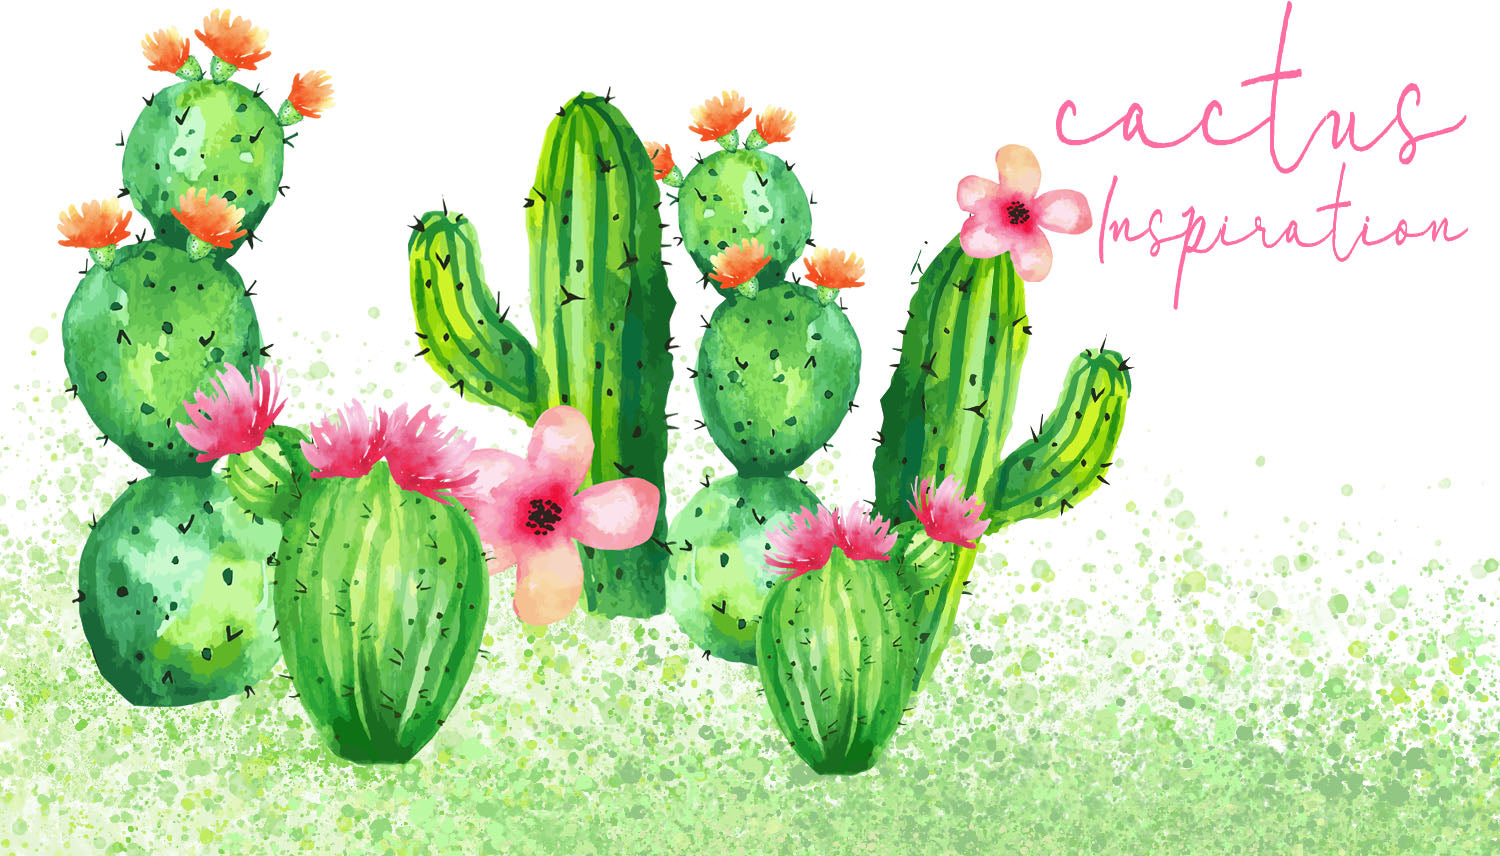 Beaded Cactus Inspirations and Tutorial